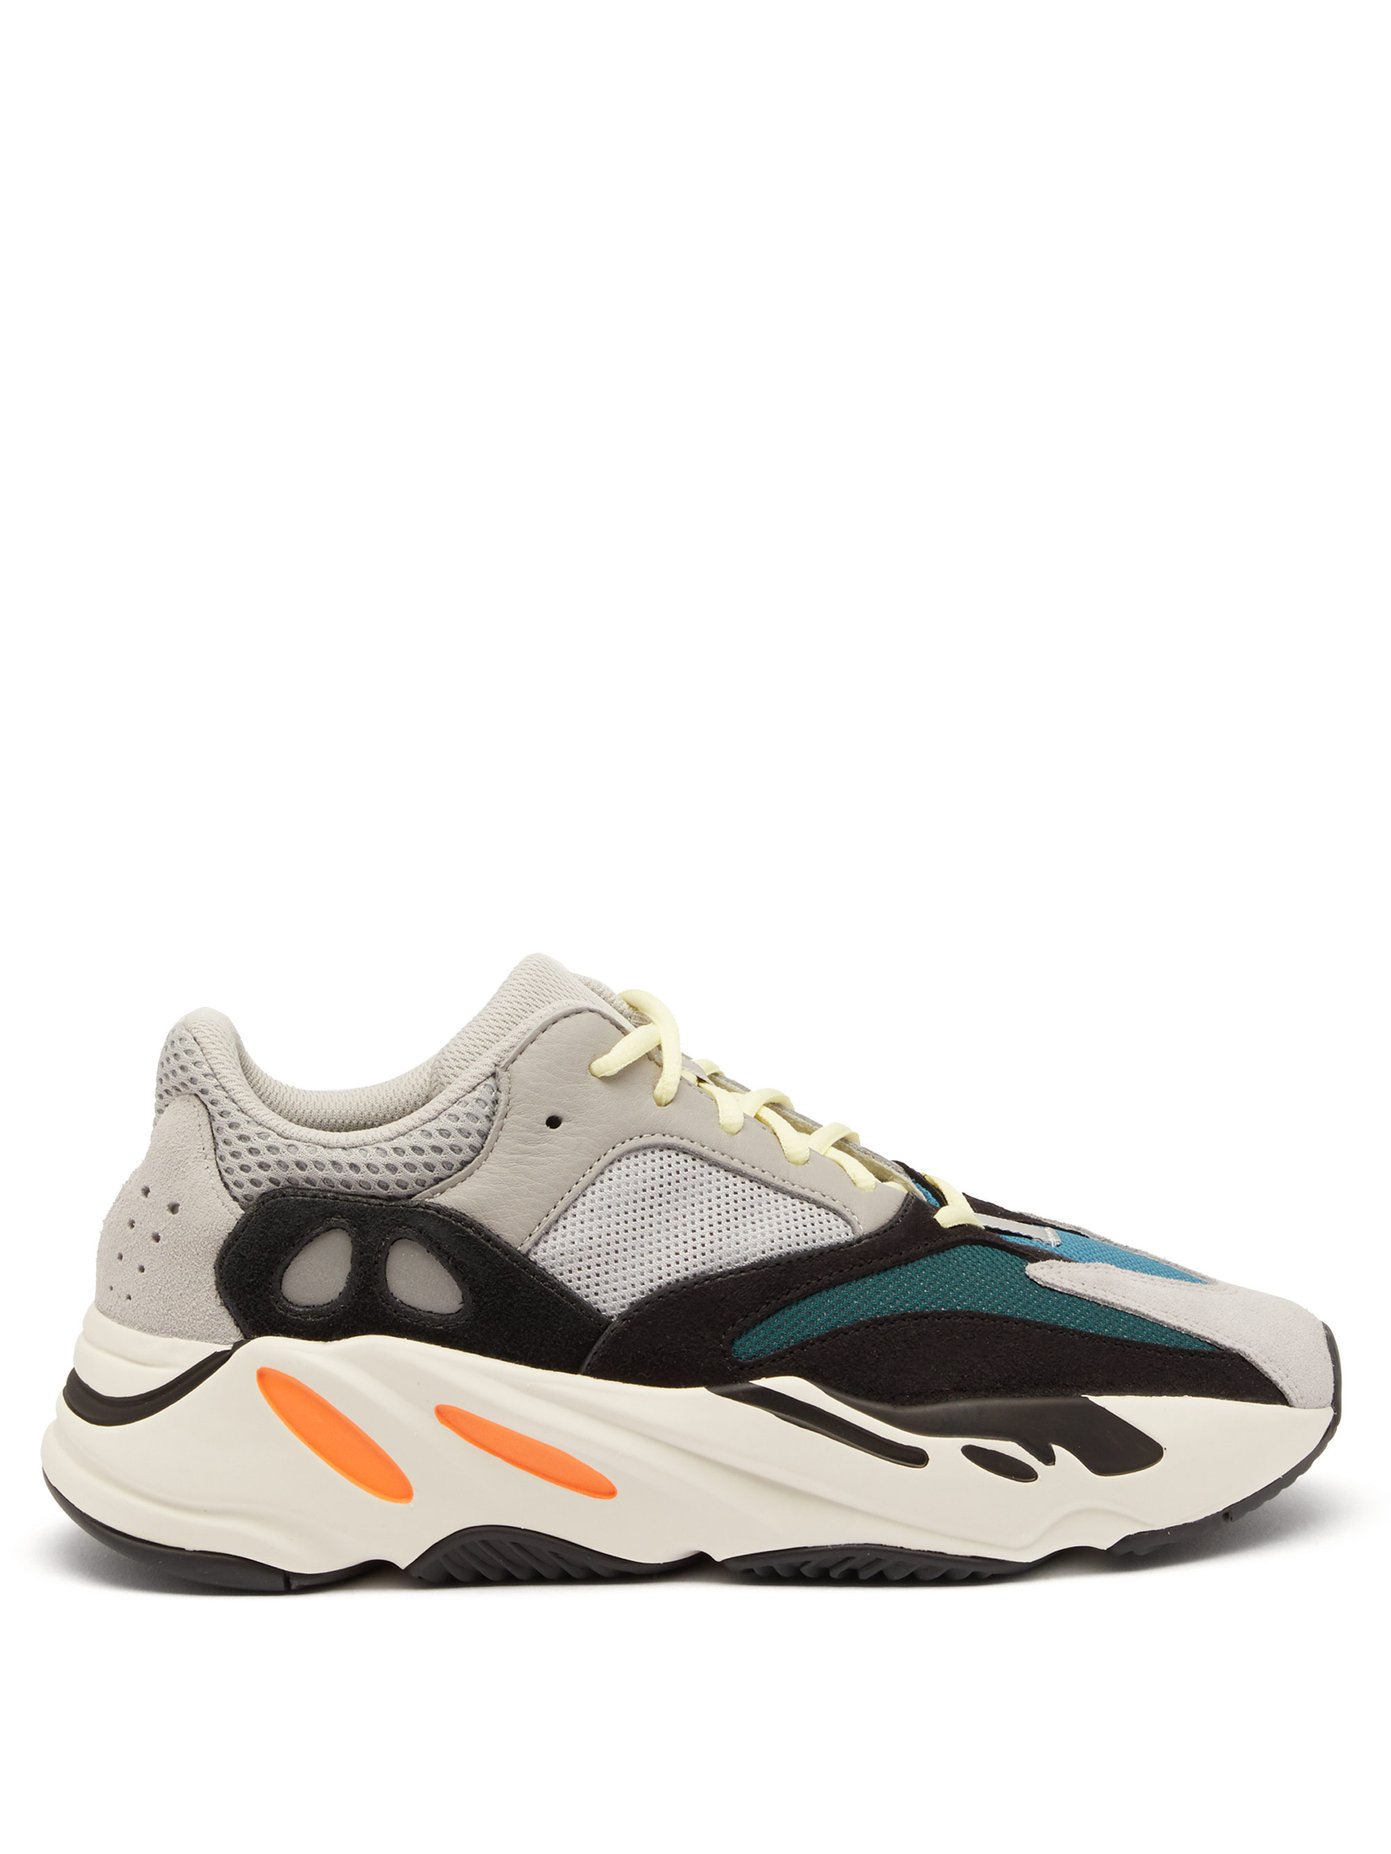 yeezy 700 front view